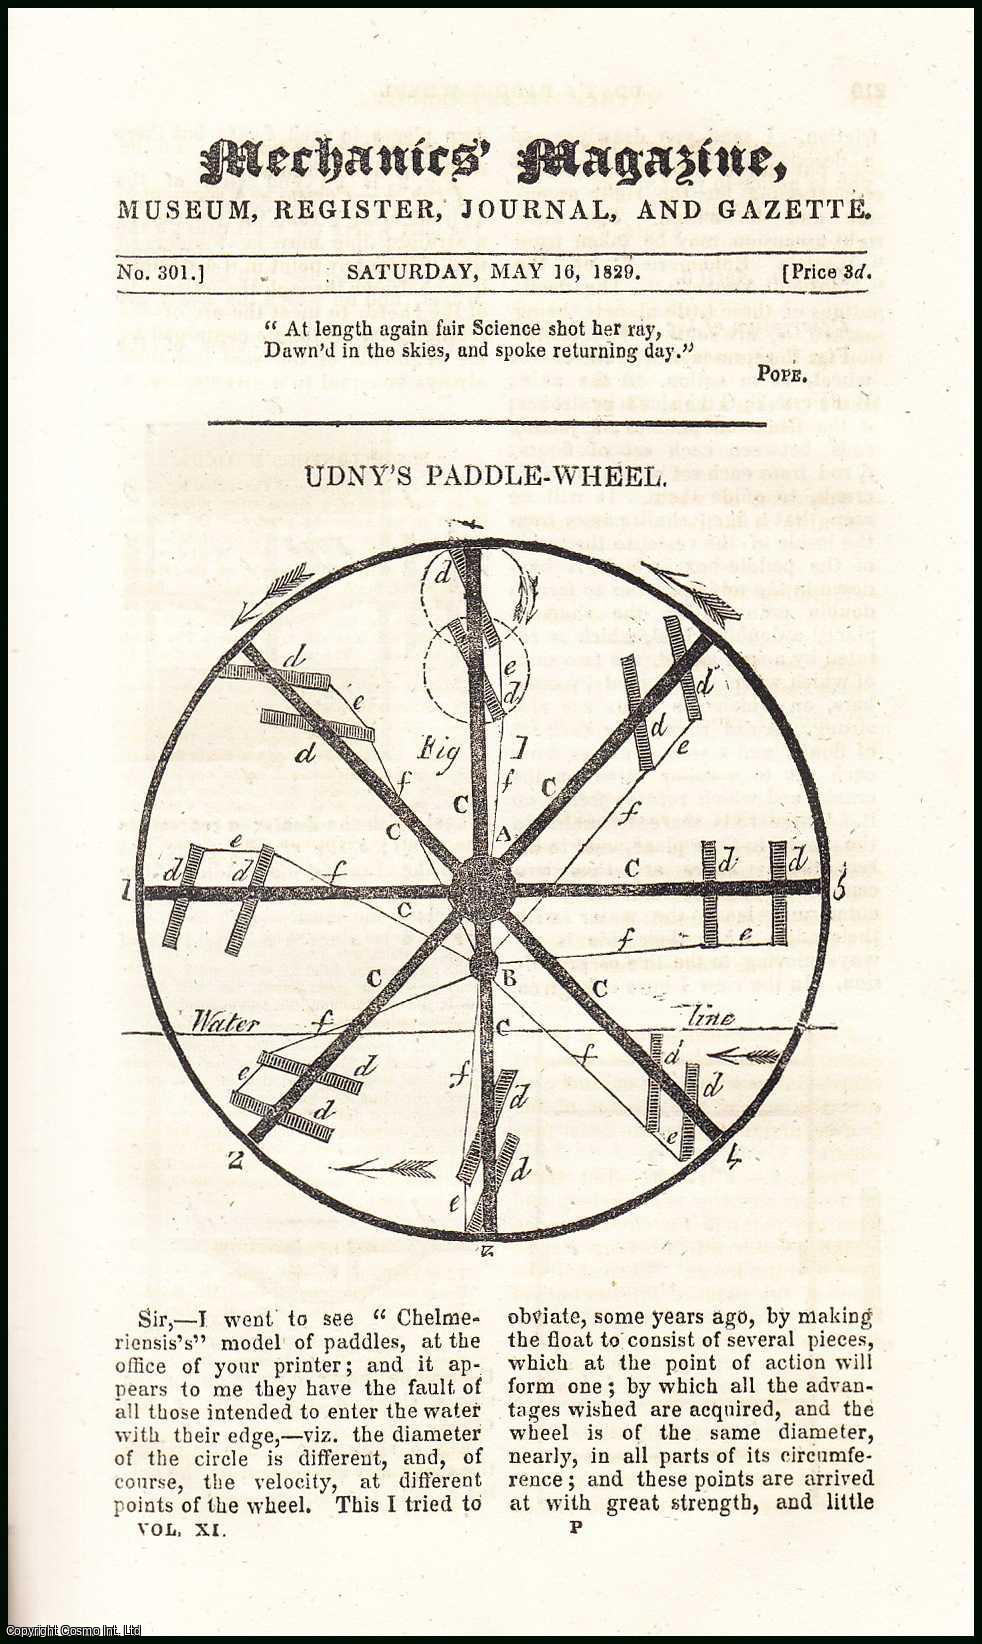 MECHANICS MAGAZINE - Udny's Paddle-Wheel; Production of the Gases, & Miniature Balloons; the Radius of Curvature of the Cycloid, etc. Mechanics Magazine, Museum, Register, Journal and Gazette. Issue No. 301. A complete rare weekly issue of the Mechanics' Magazine, 1829.